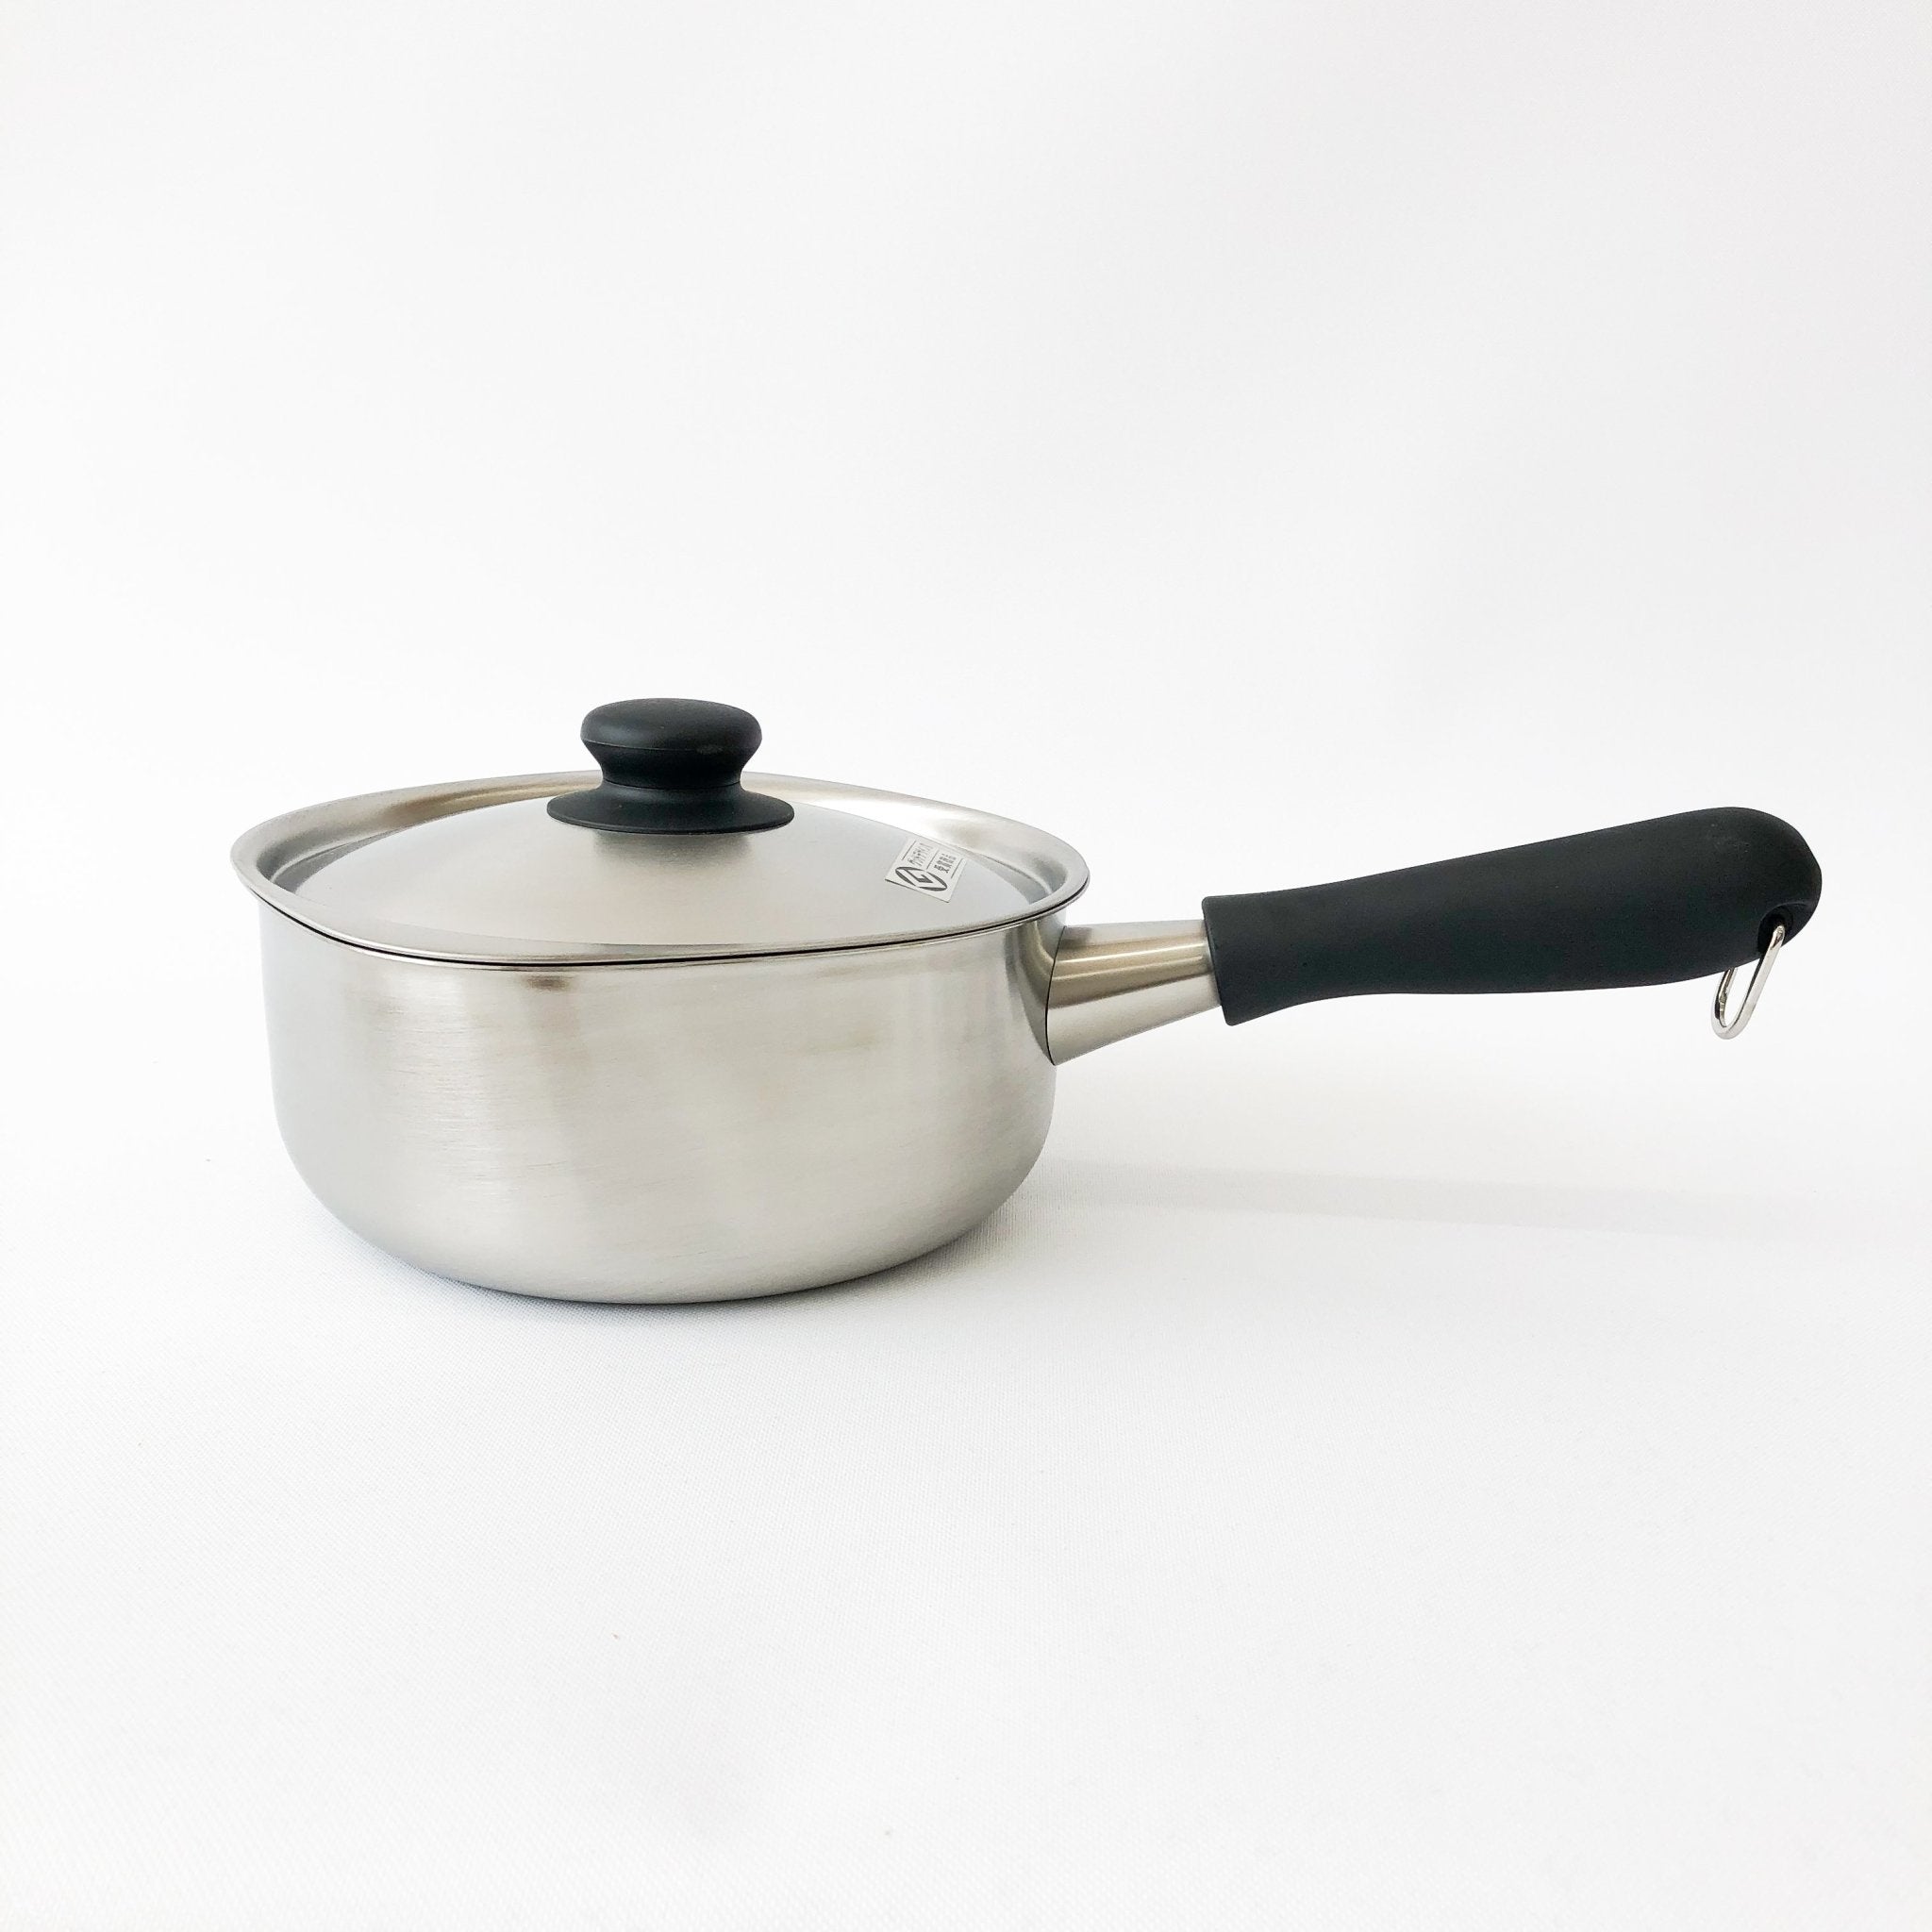 18cm Milk Pot Stainless Steel 304 Korean Cooking Pot with Handle Pot Sauce  for Hot Food - China 304 Stainless Steel and Home price